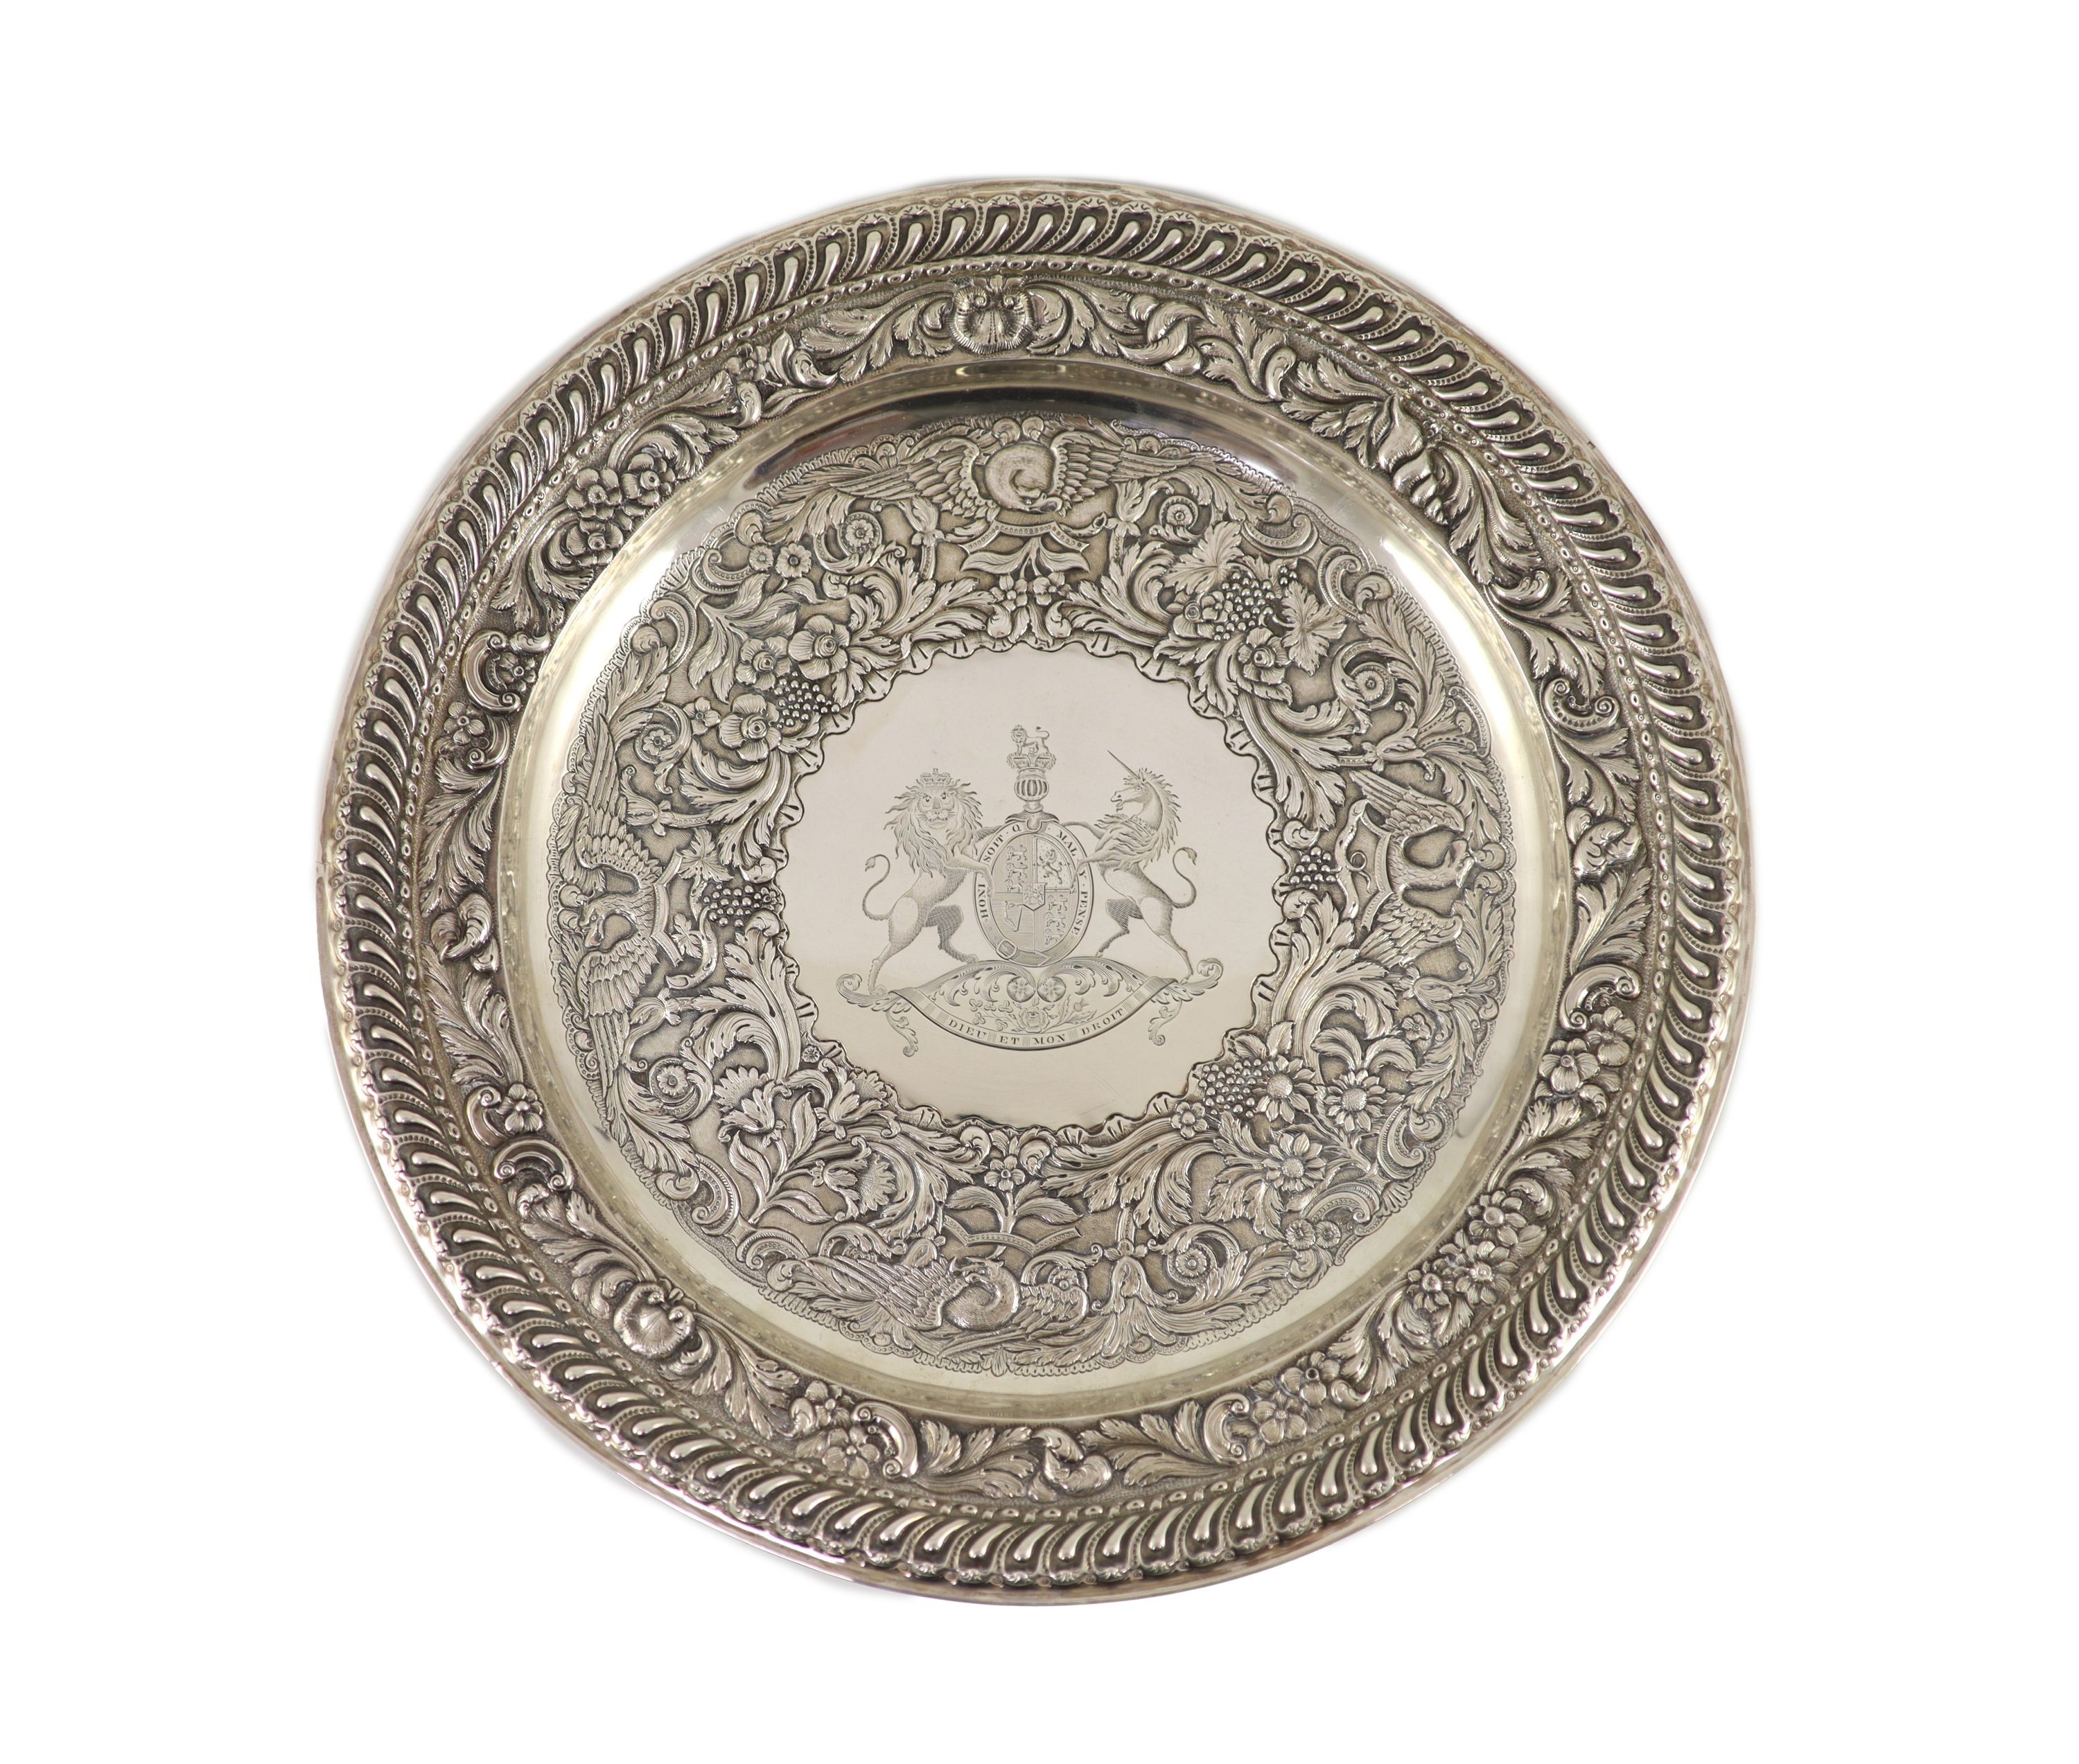 A George IV Irish embossed silver charger, by Stephen Bergin, engraved with the United Kingdom Royal Coat of Arms